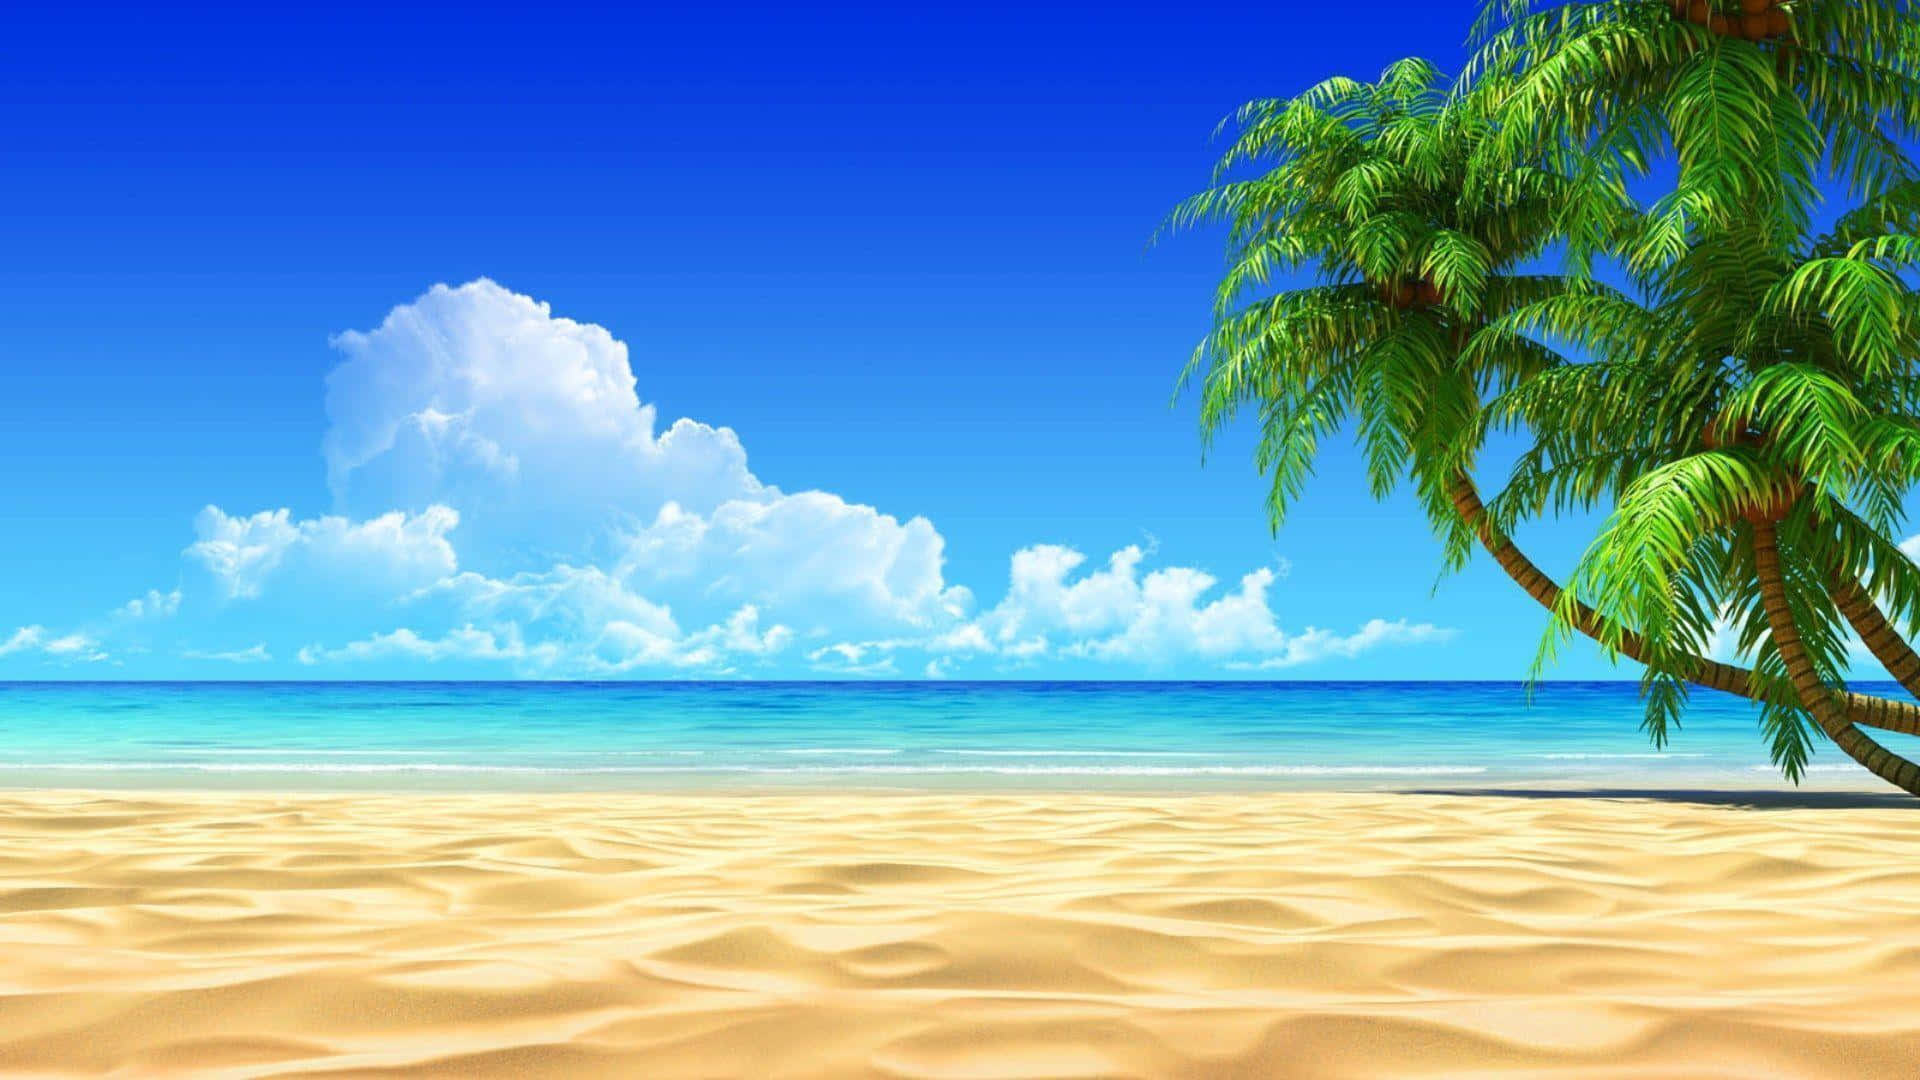 Unwind and relax at this stunning beach with this high resolution wallpaper.